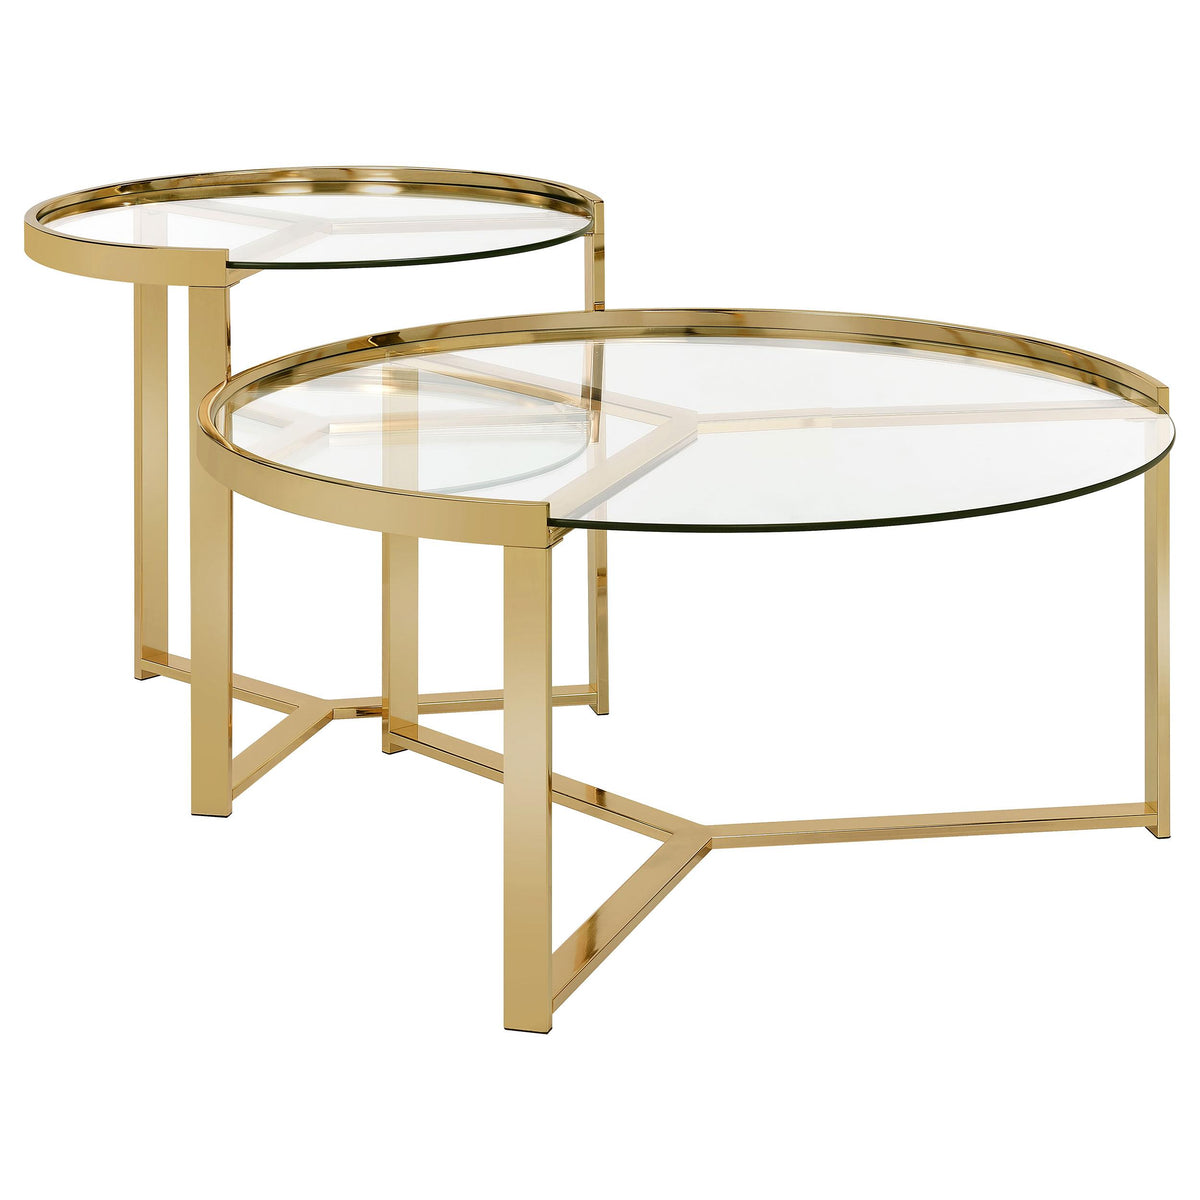 Delia 2-piece Round Nesting Table Clear and Gold Delia 2-piece Round Nesting Table Clear and Gold Half Price Furniture